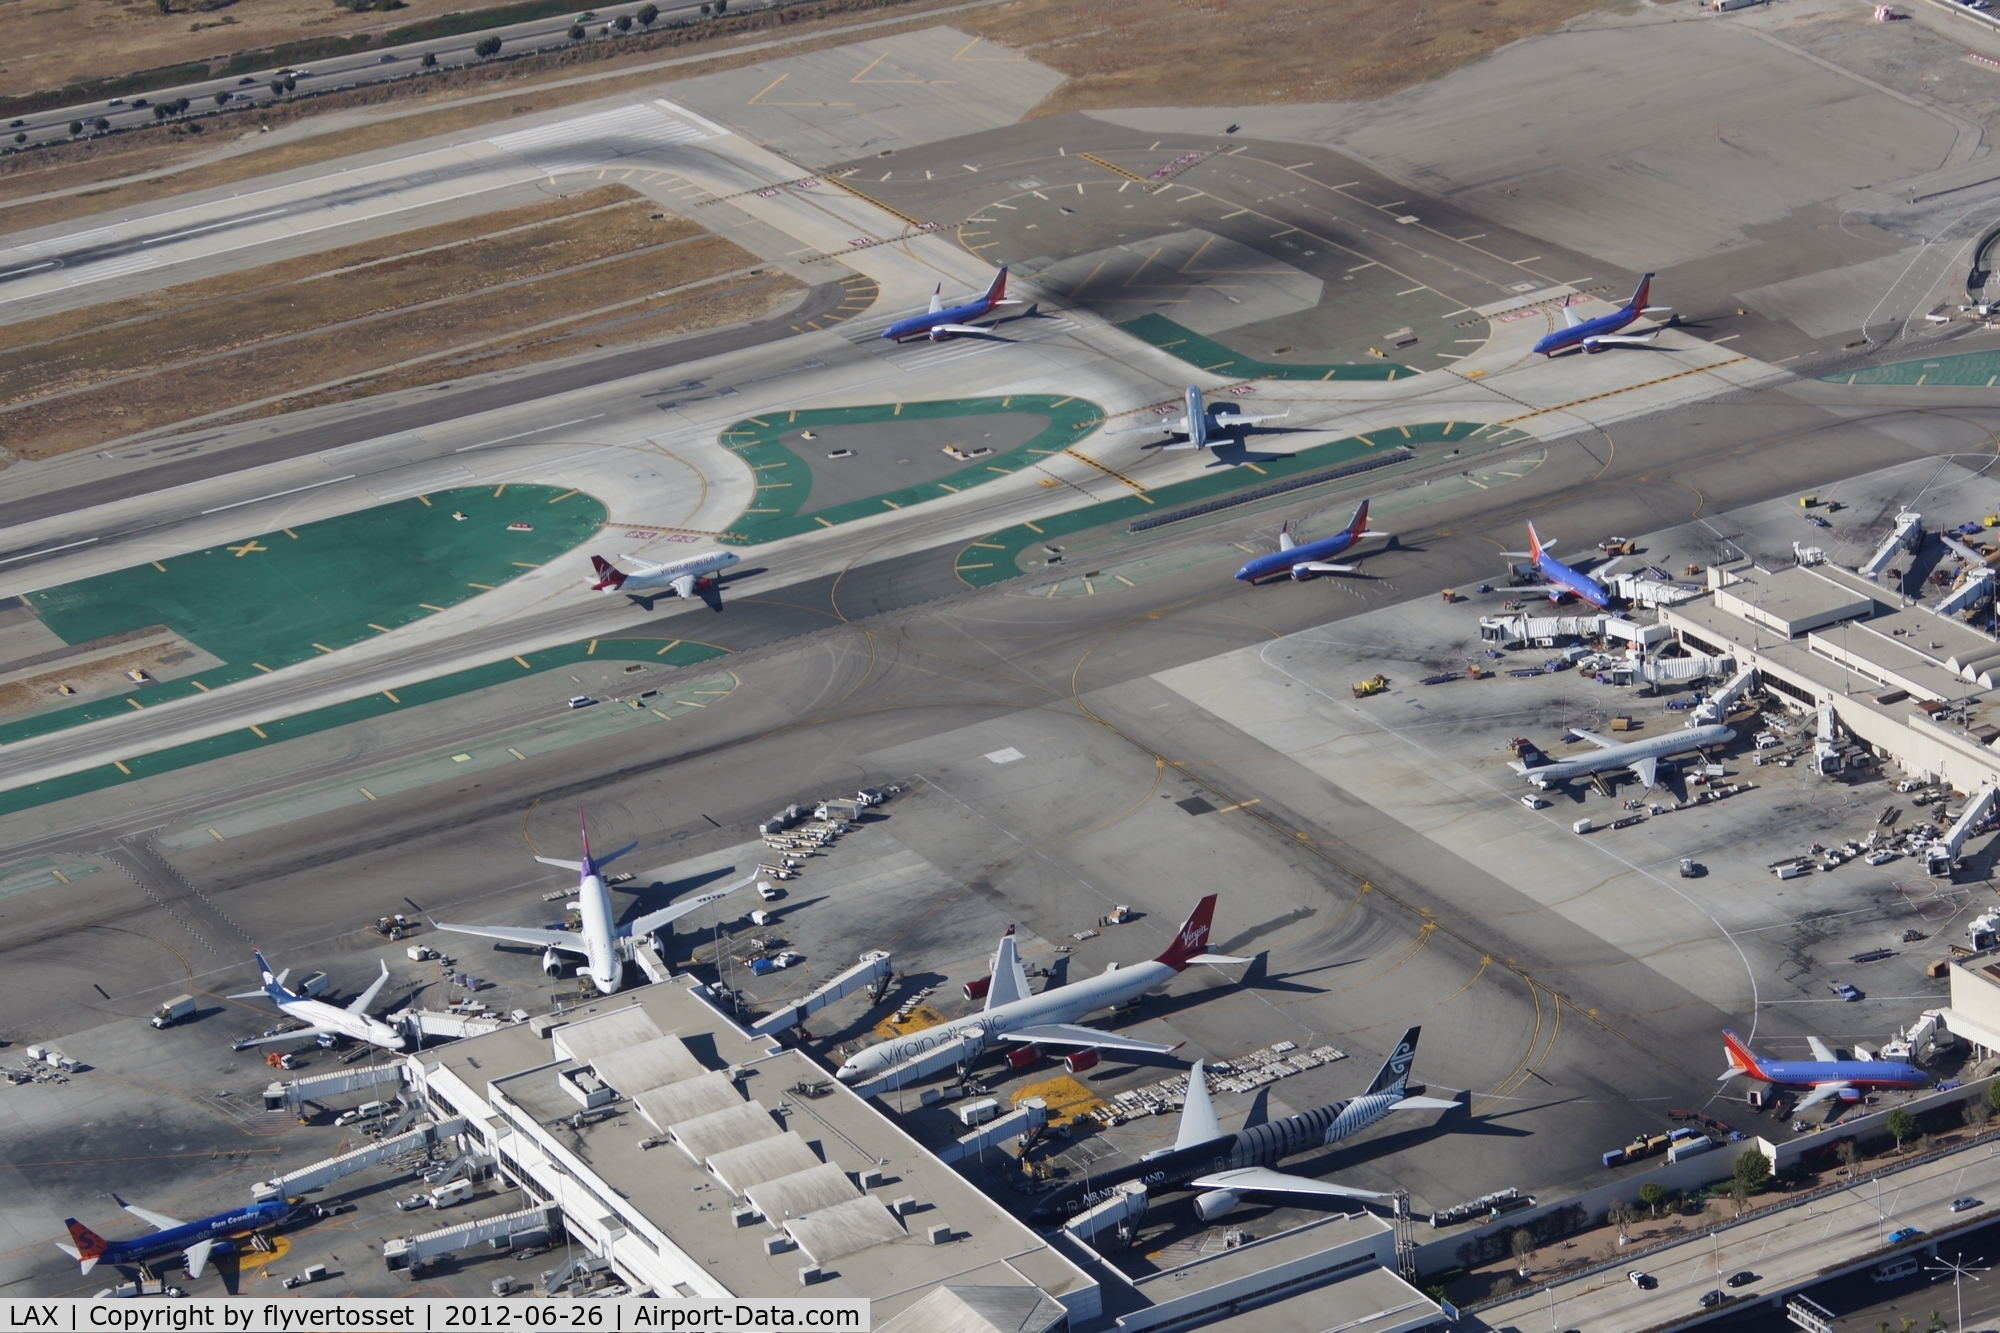 Los Angeles International Airport (LAX) - Busy day at LAX